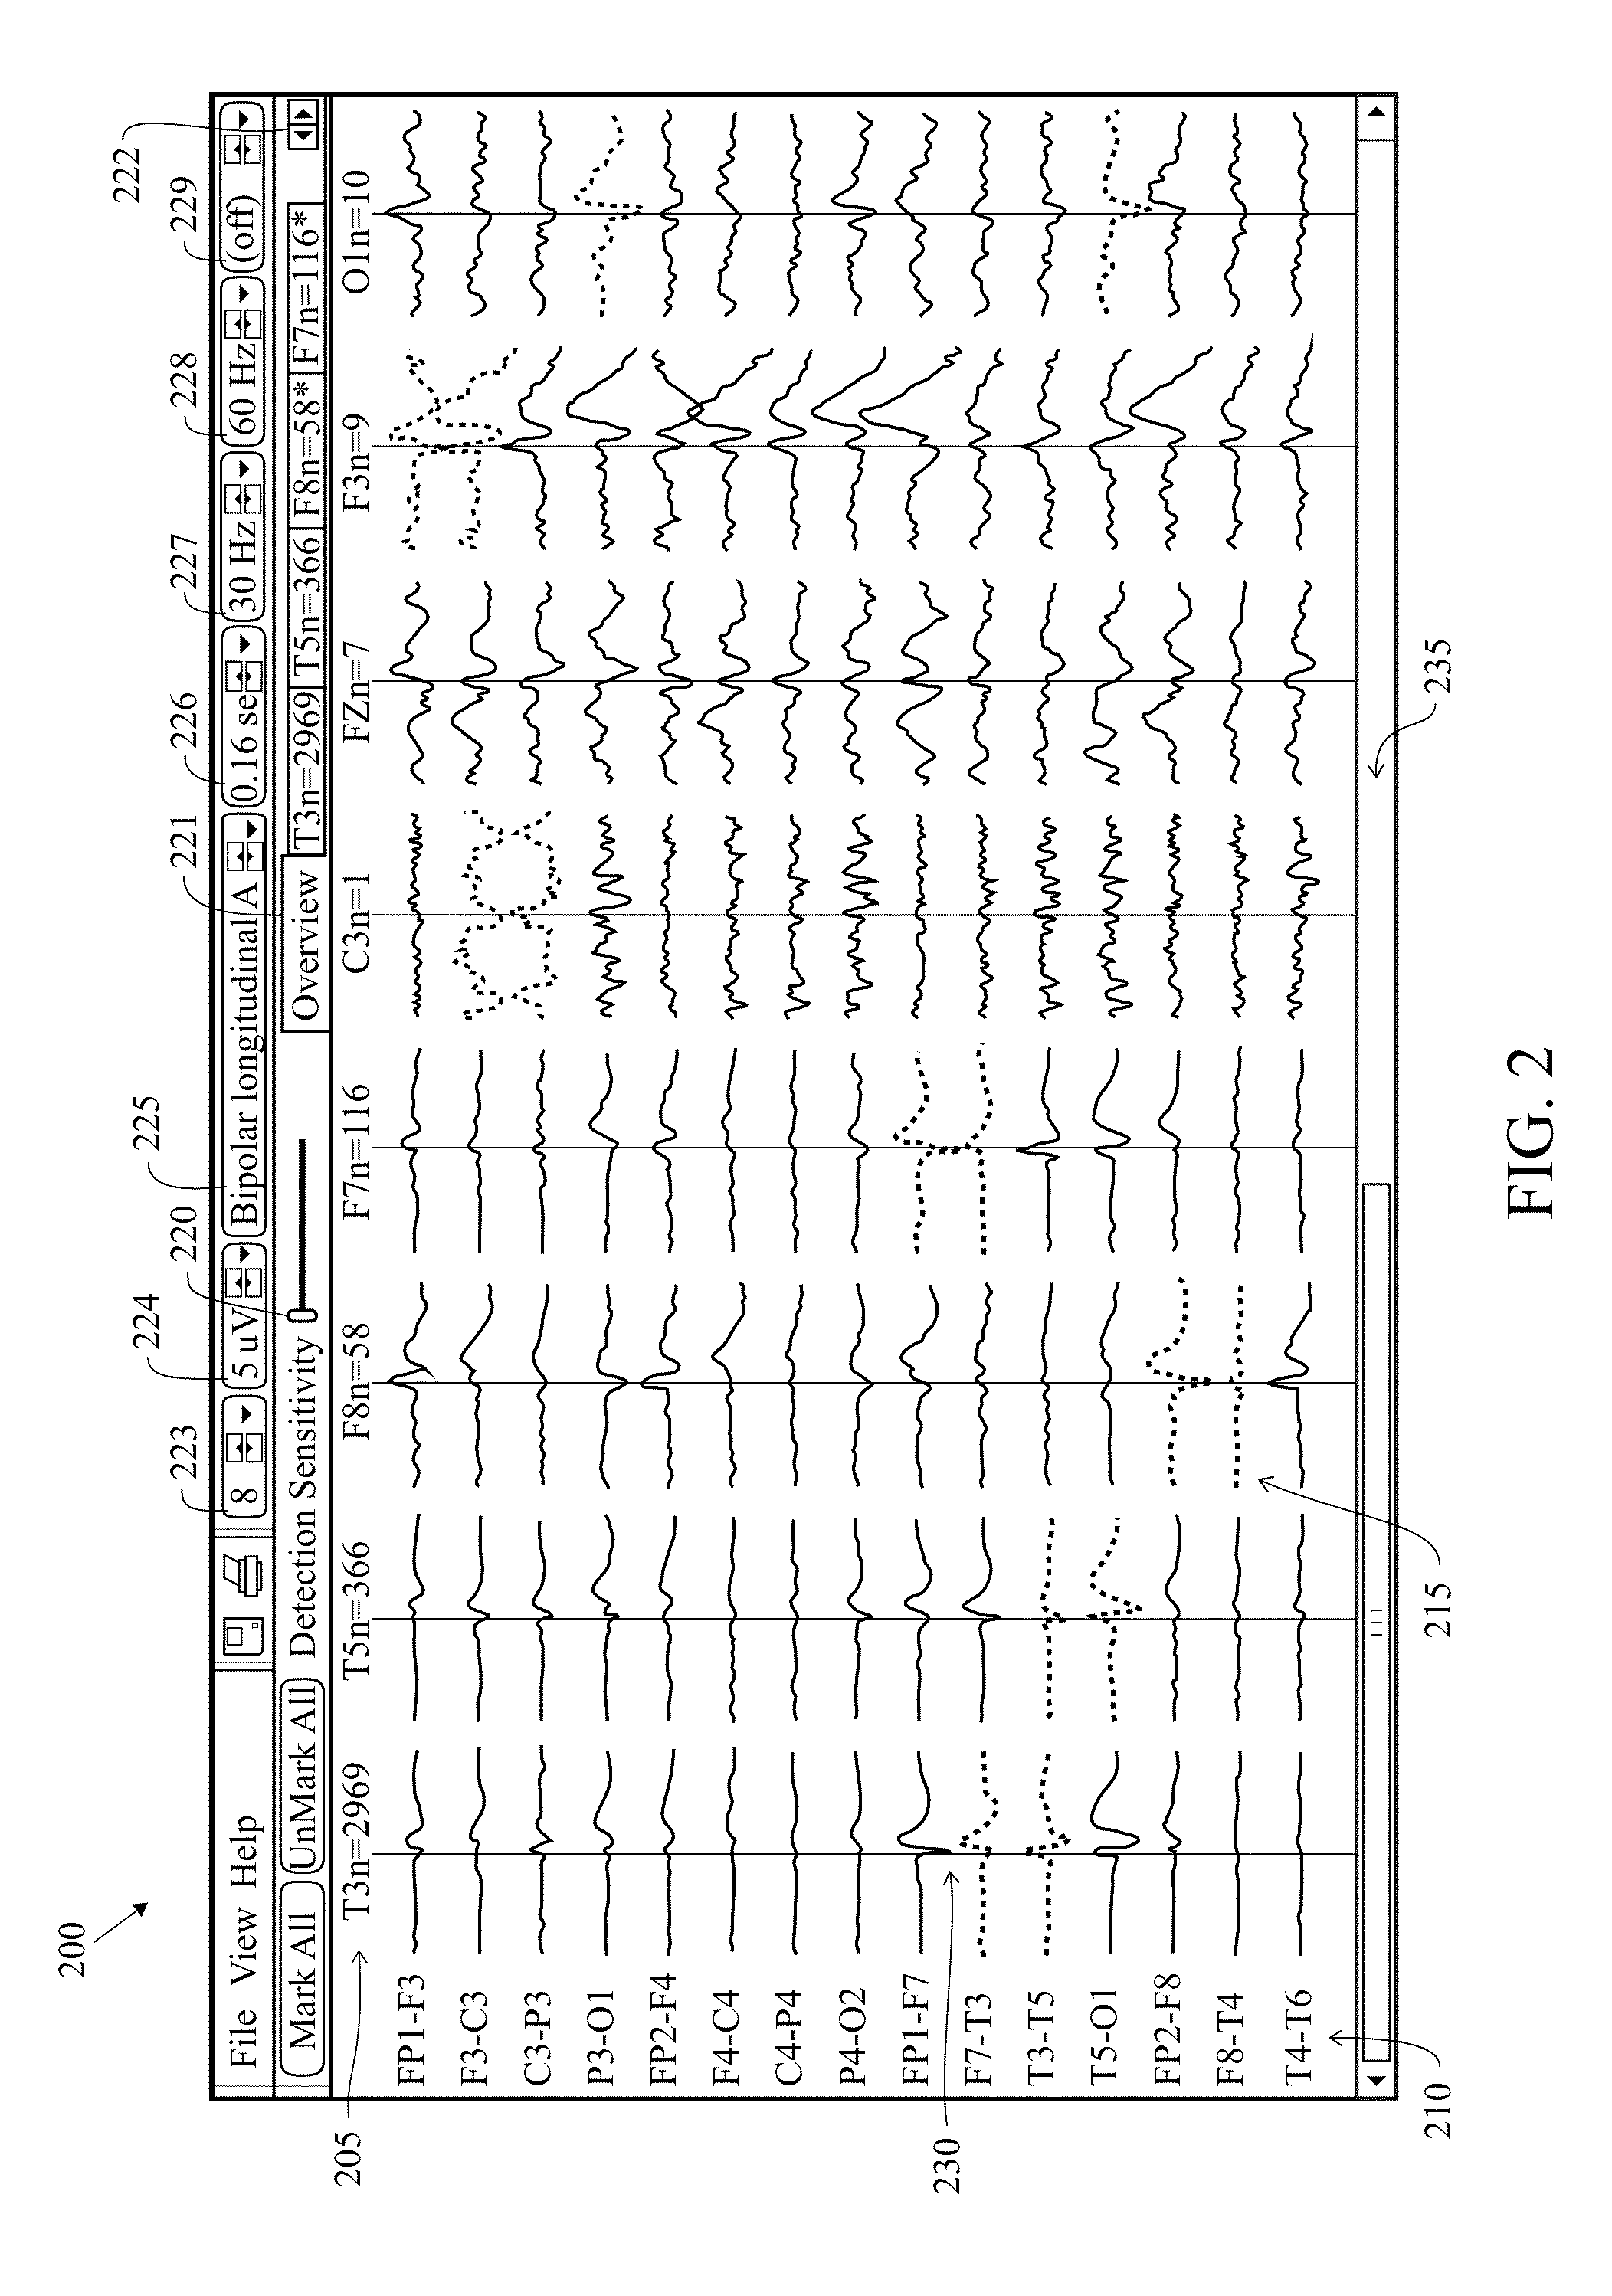 Method And System For Analyzing An EEG Recording